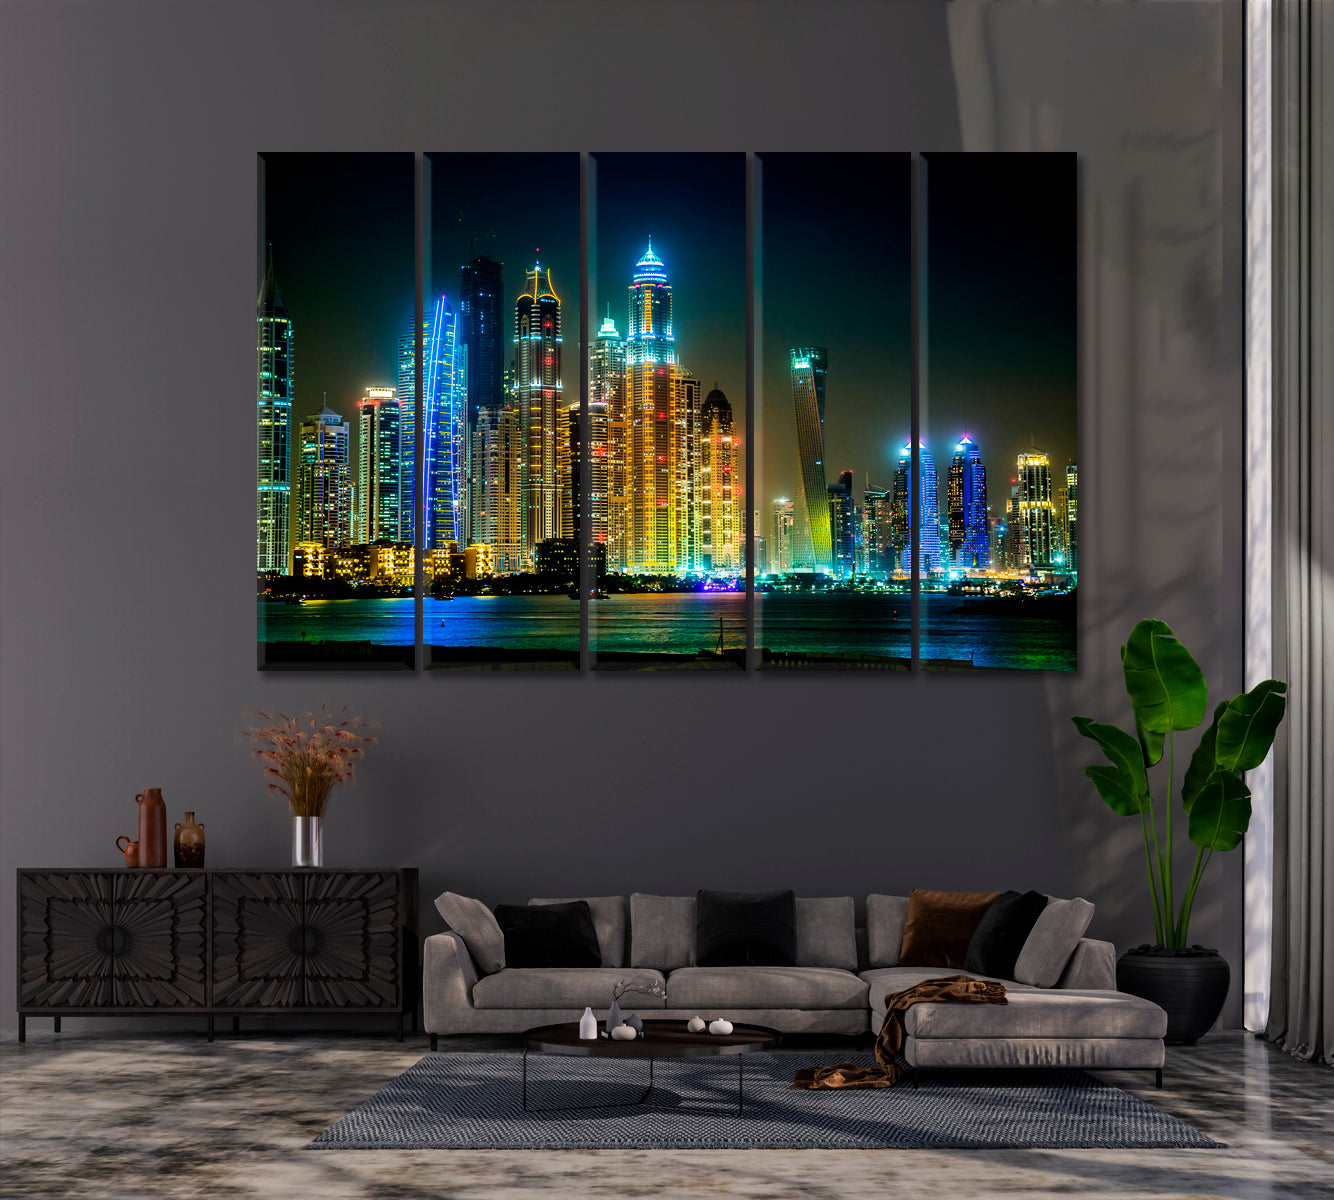 Dubai Downtown with City Lights at Night Canvas Print ArtLexy 5 Panels 36"x24" inches 